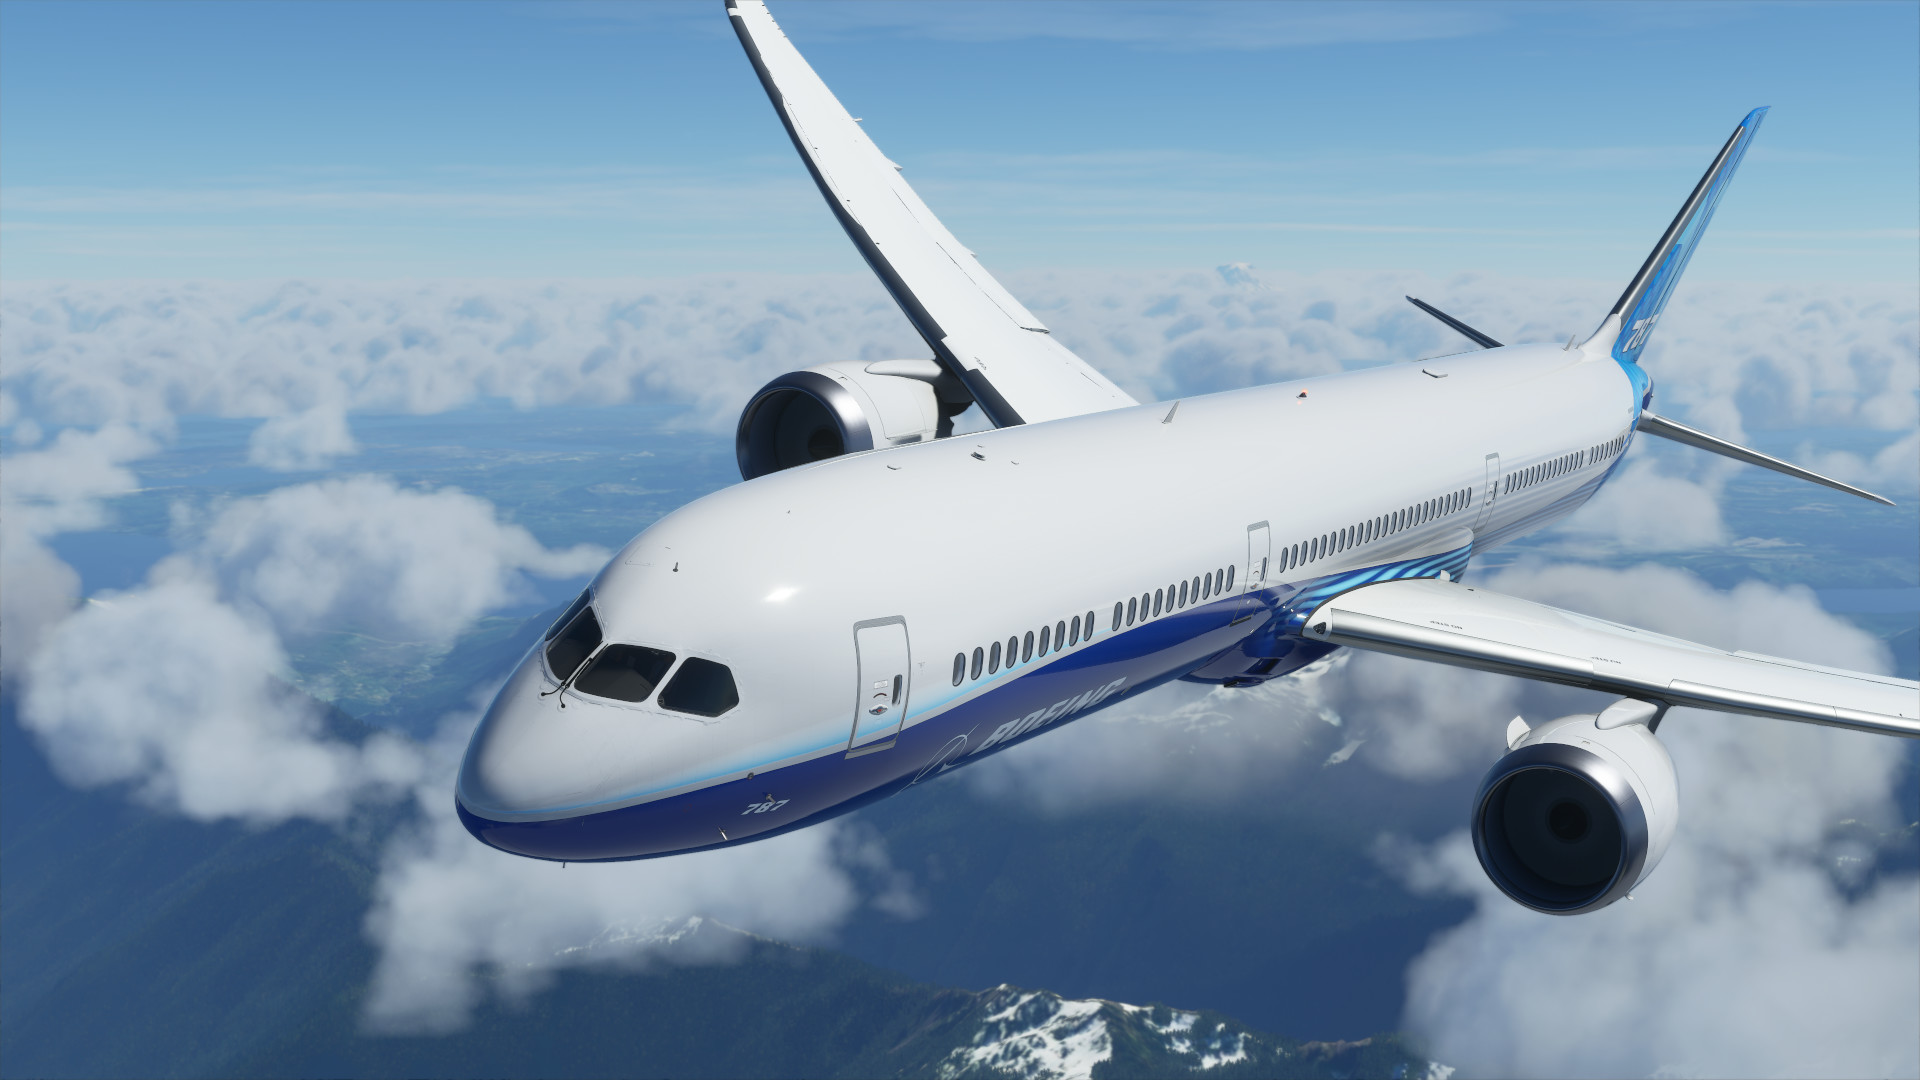  Microsoft Flight Simulator's first patch is live, but you may want to reinstall 